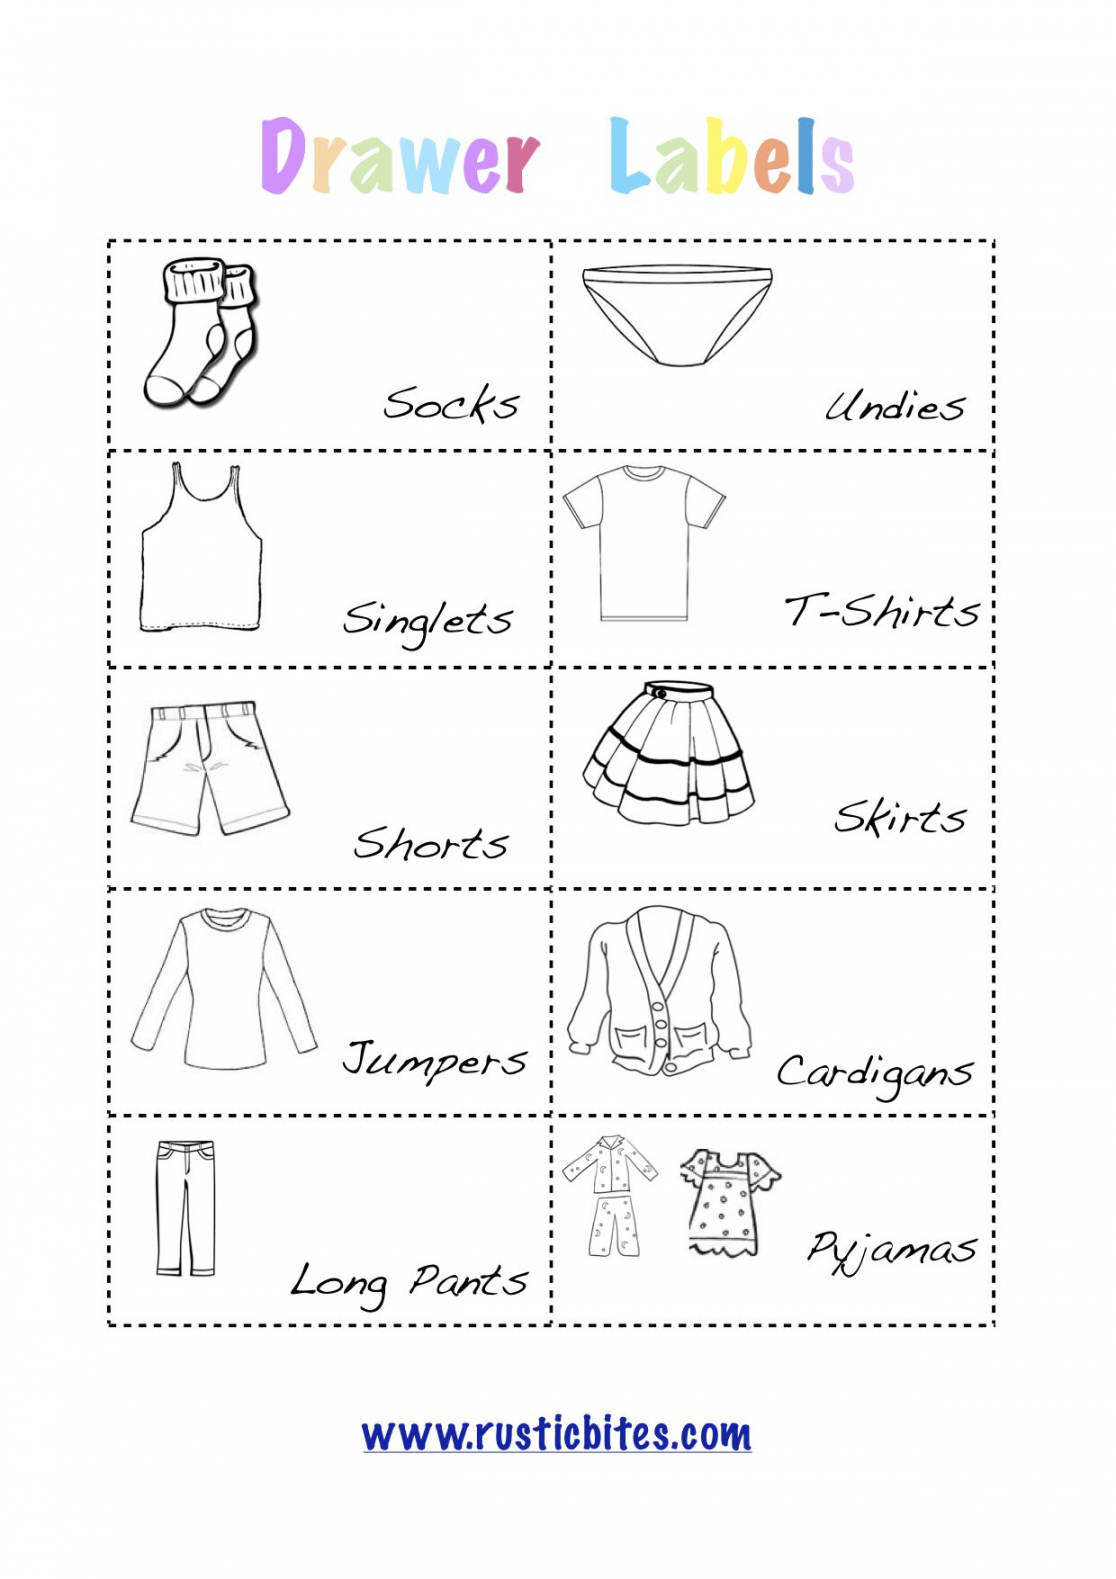 Pin on Laundry - FREE Printables - Free Printable Printable Clothing Drawer Labels